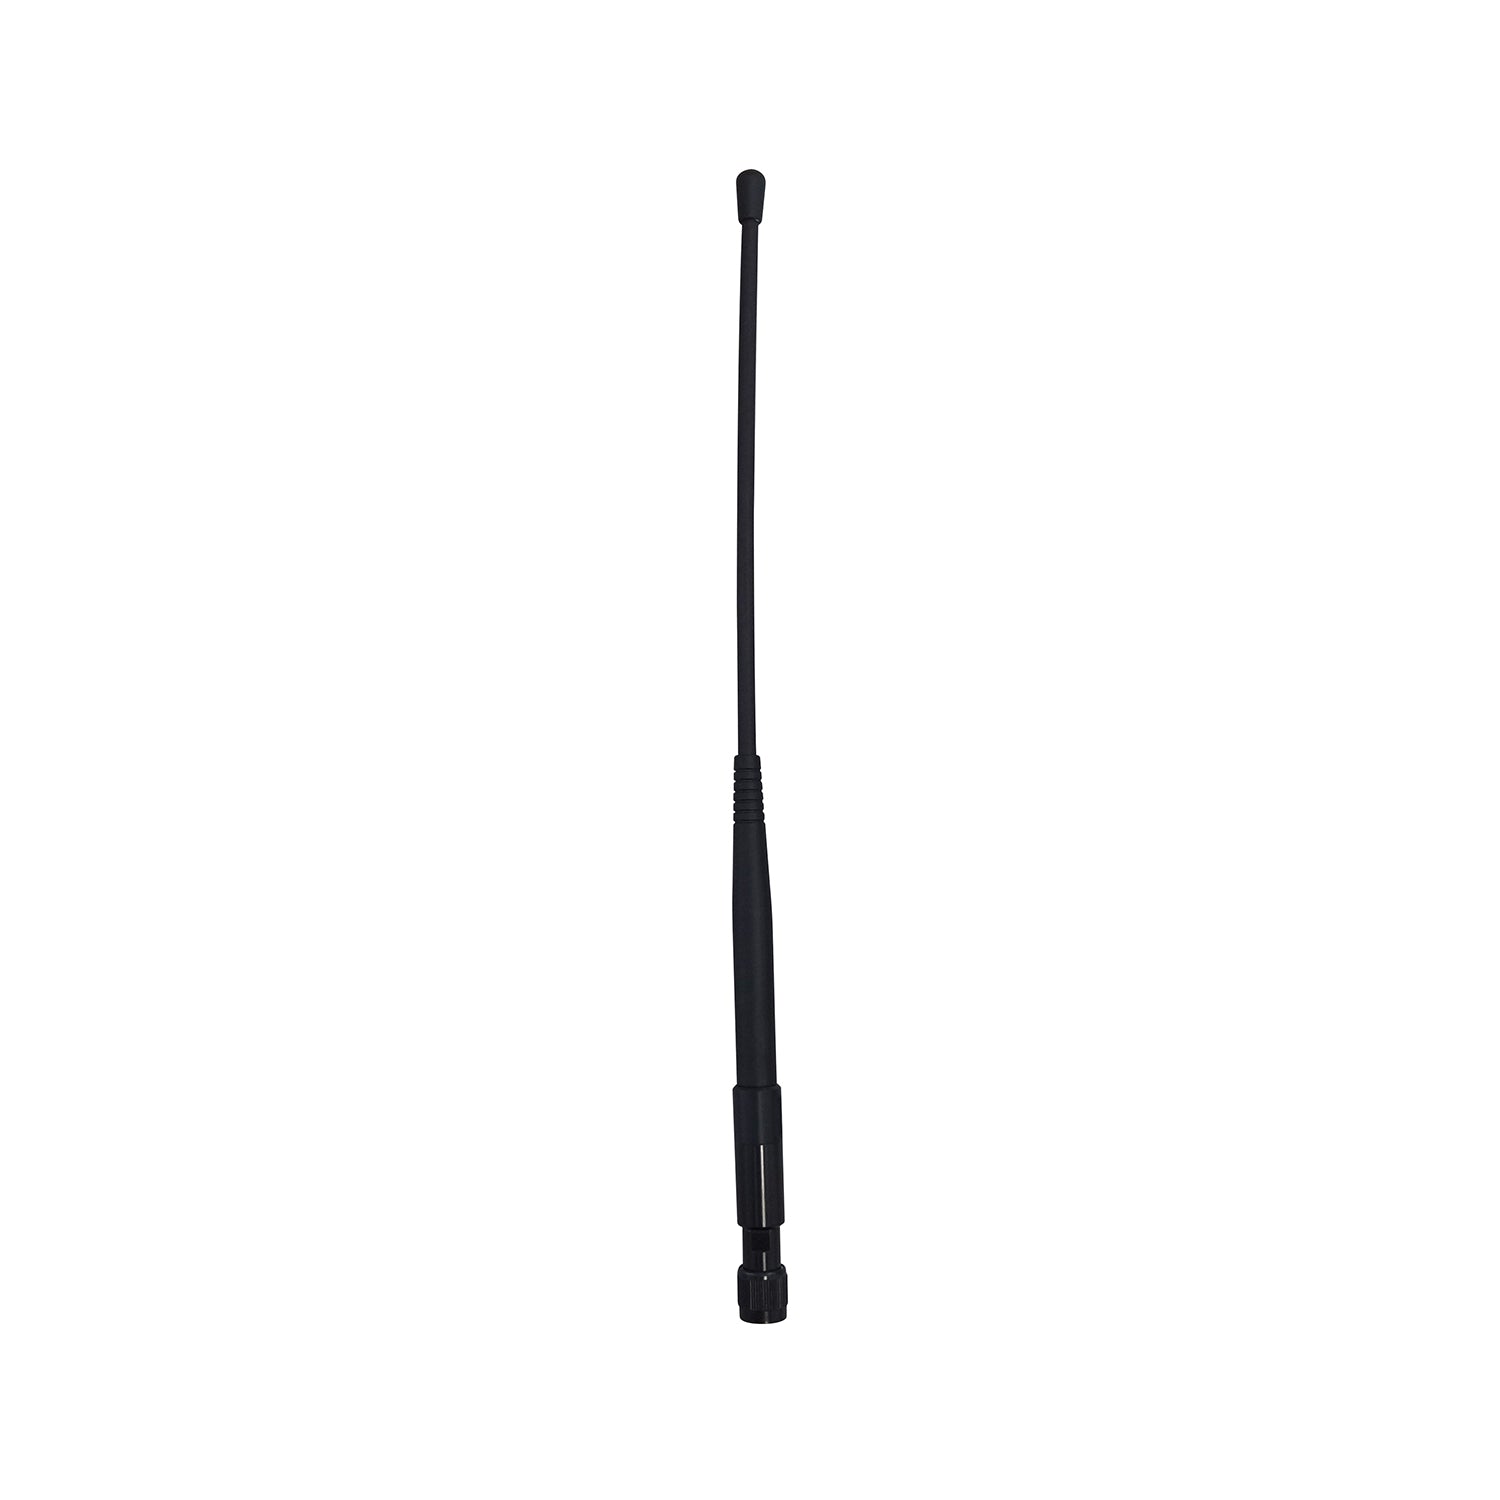 Antenna 450-470 MHz High Frequency -GNSS Receivers- eGPS Solutions Inc.